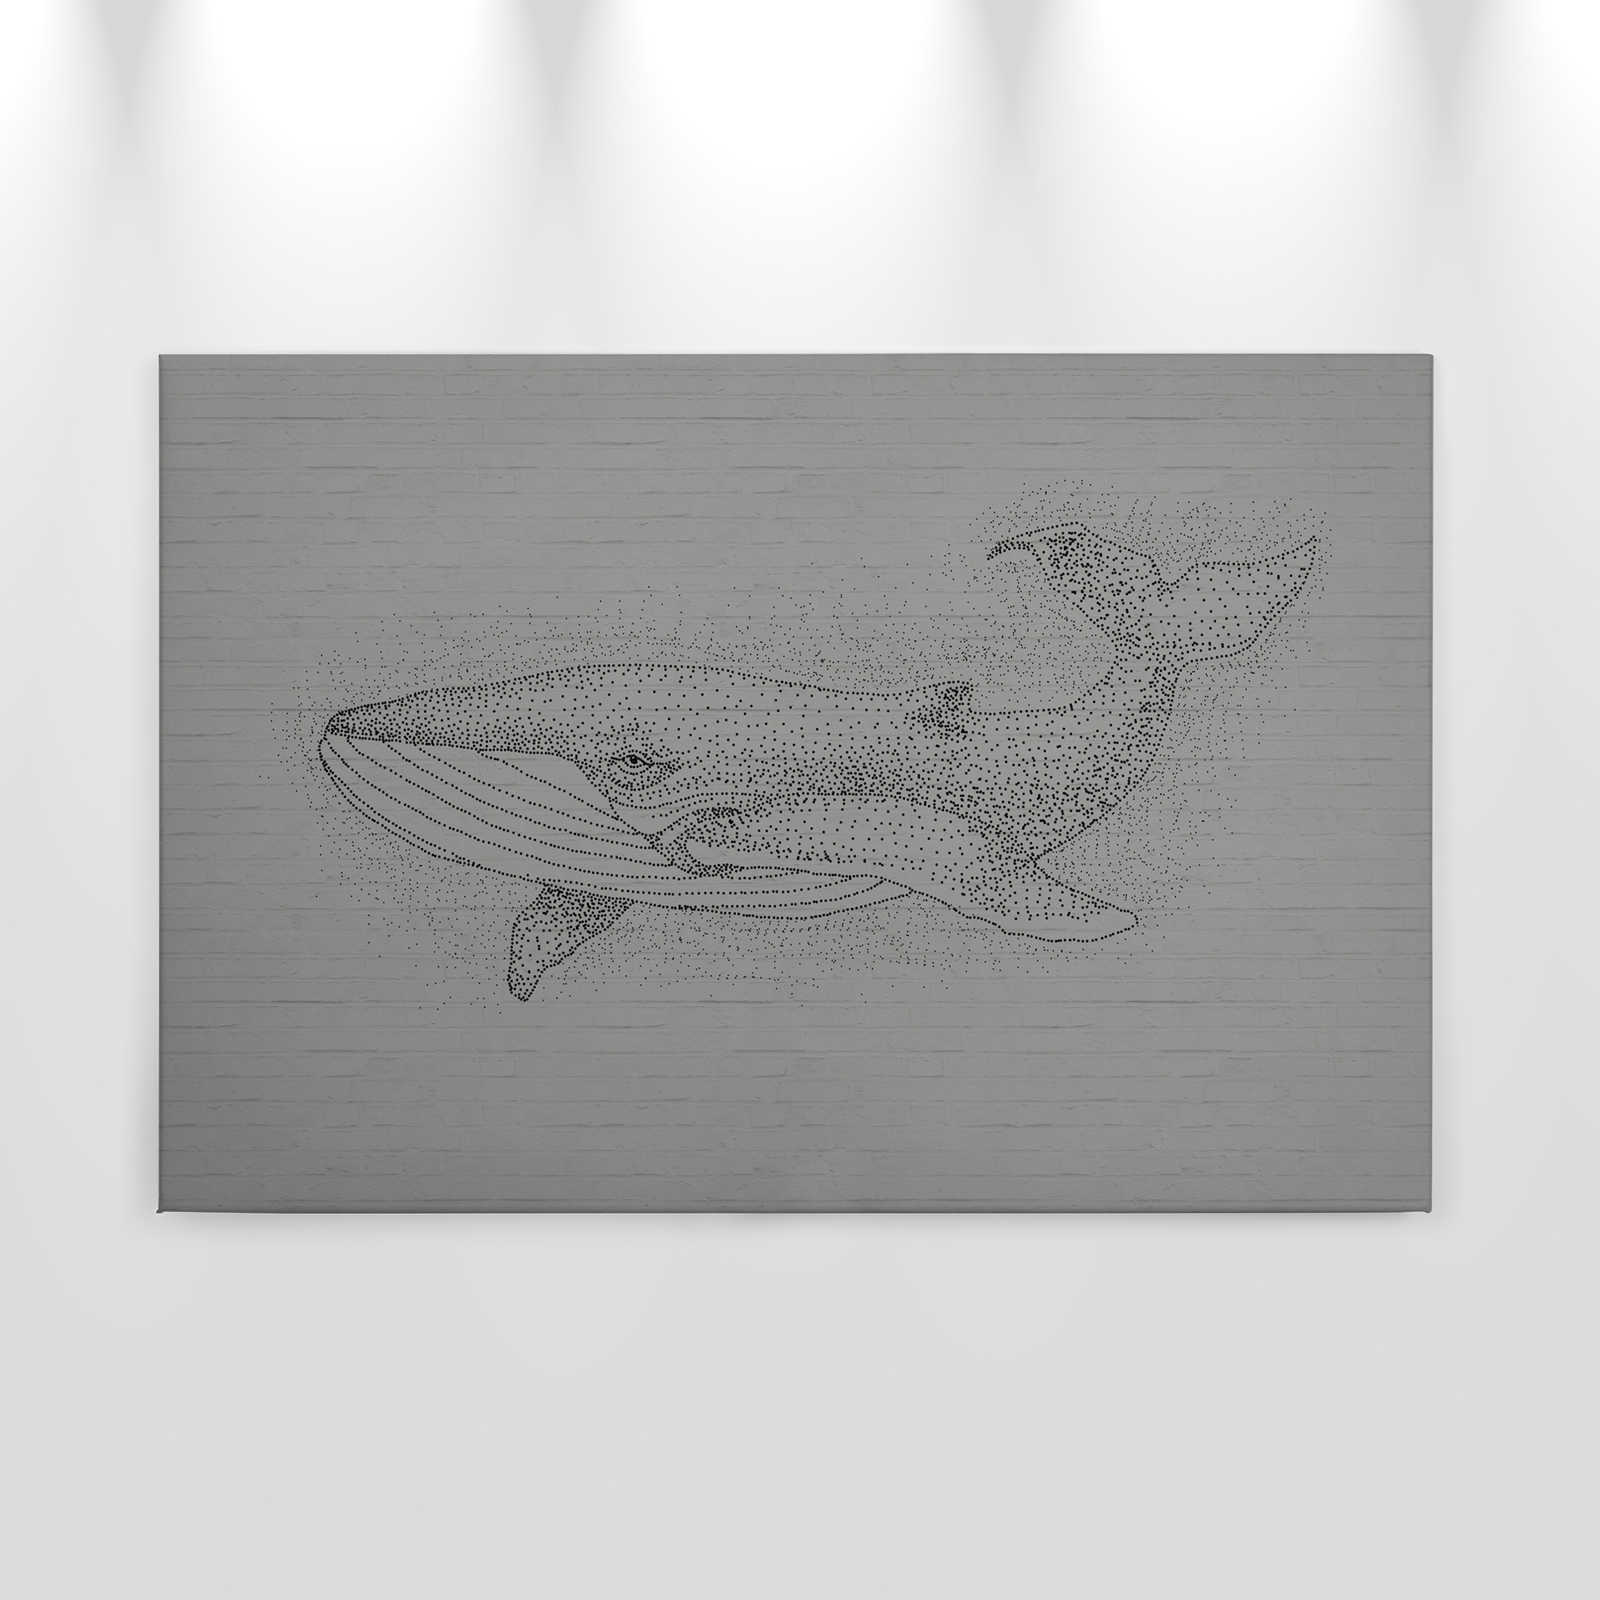             Canvas painting Whale in drawing style on 3D stone wall - 0,90 m x 0,60 m
        